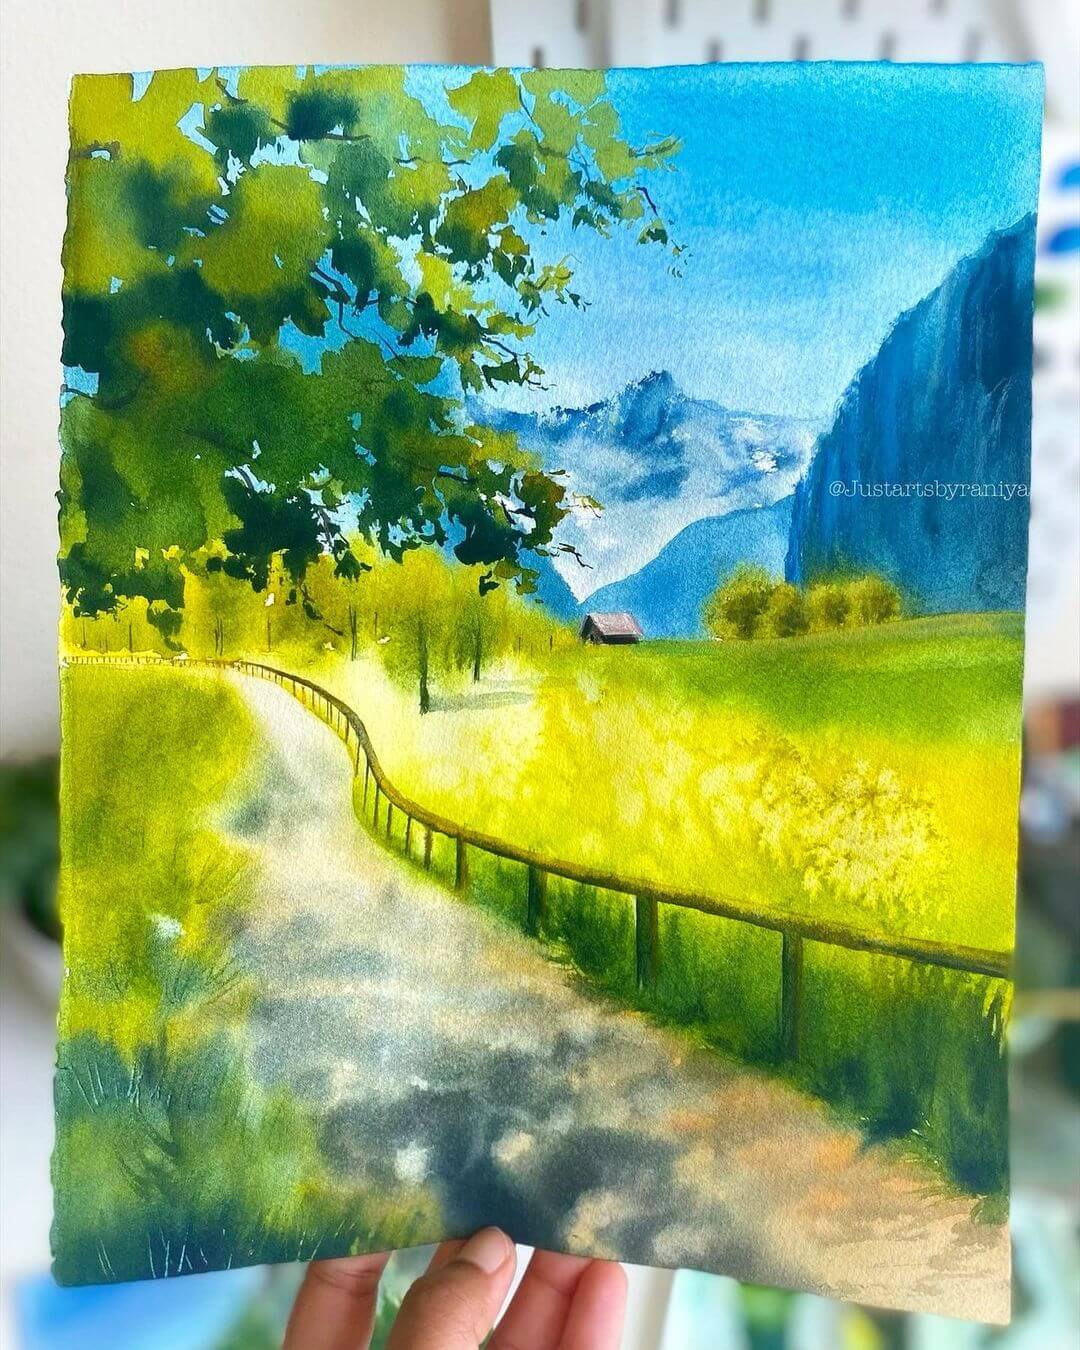 6. A green meadow water colour painting with mountains and a small house in the background